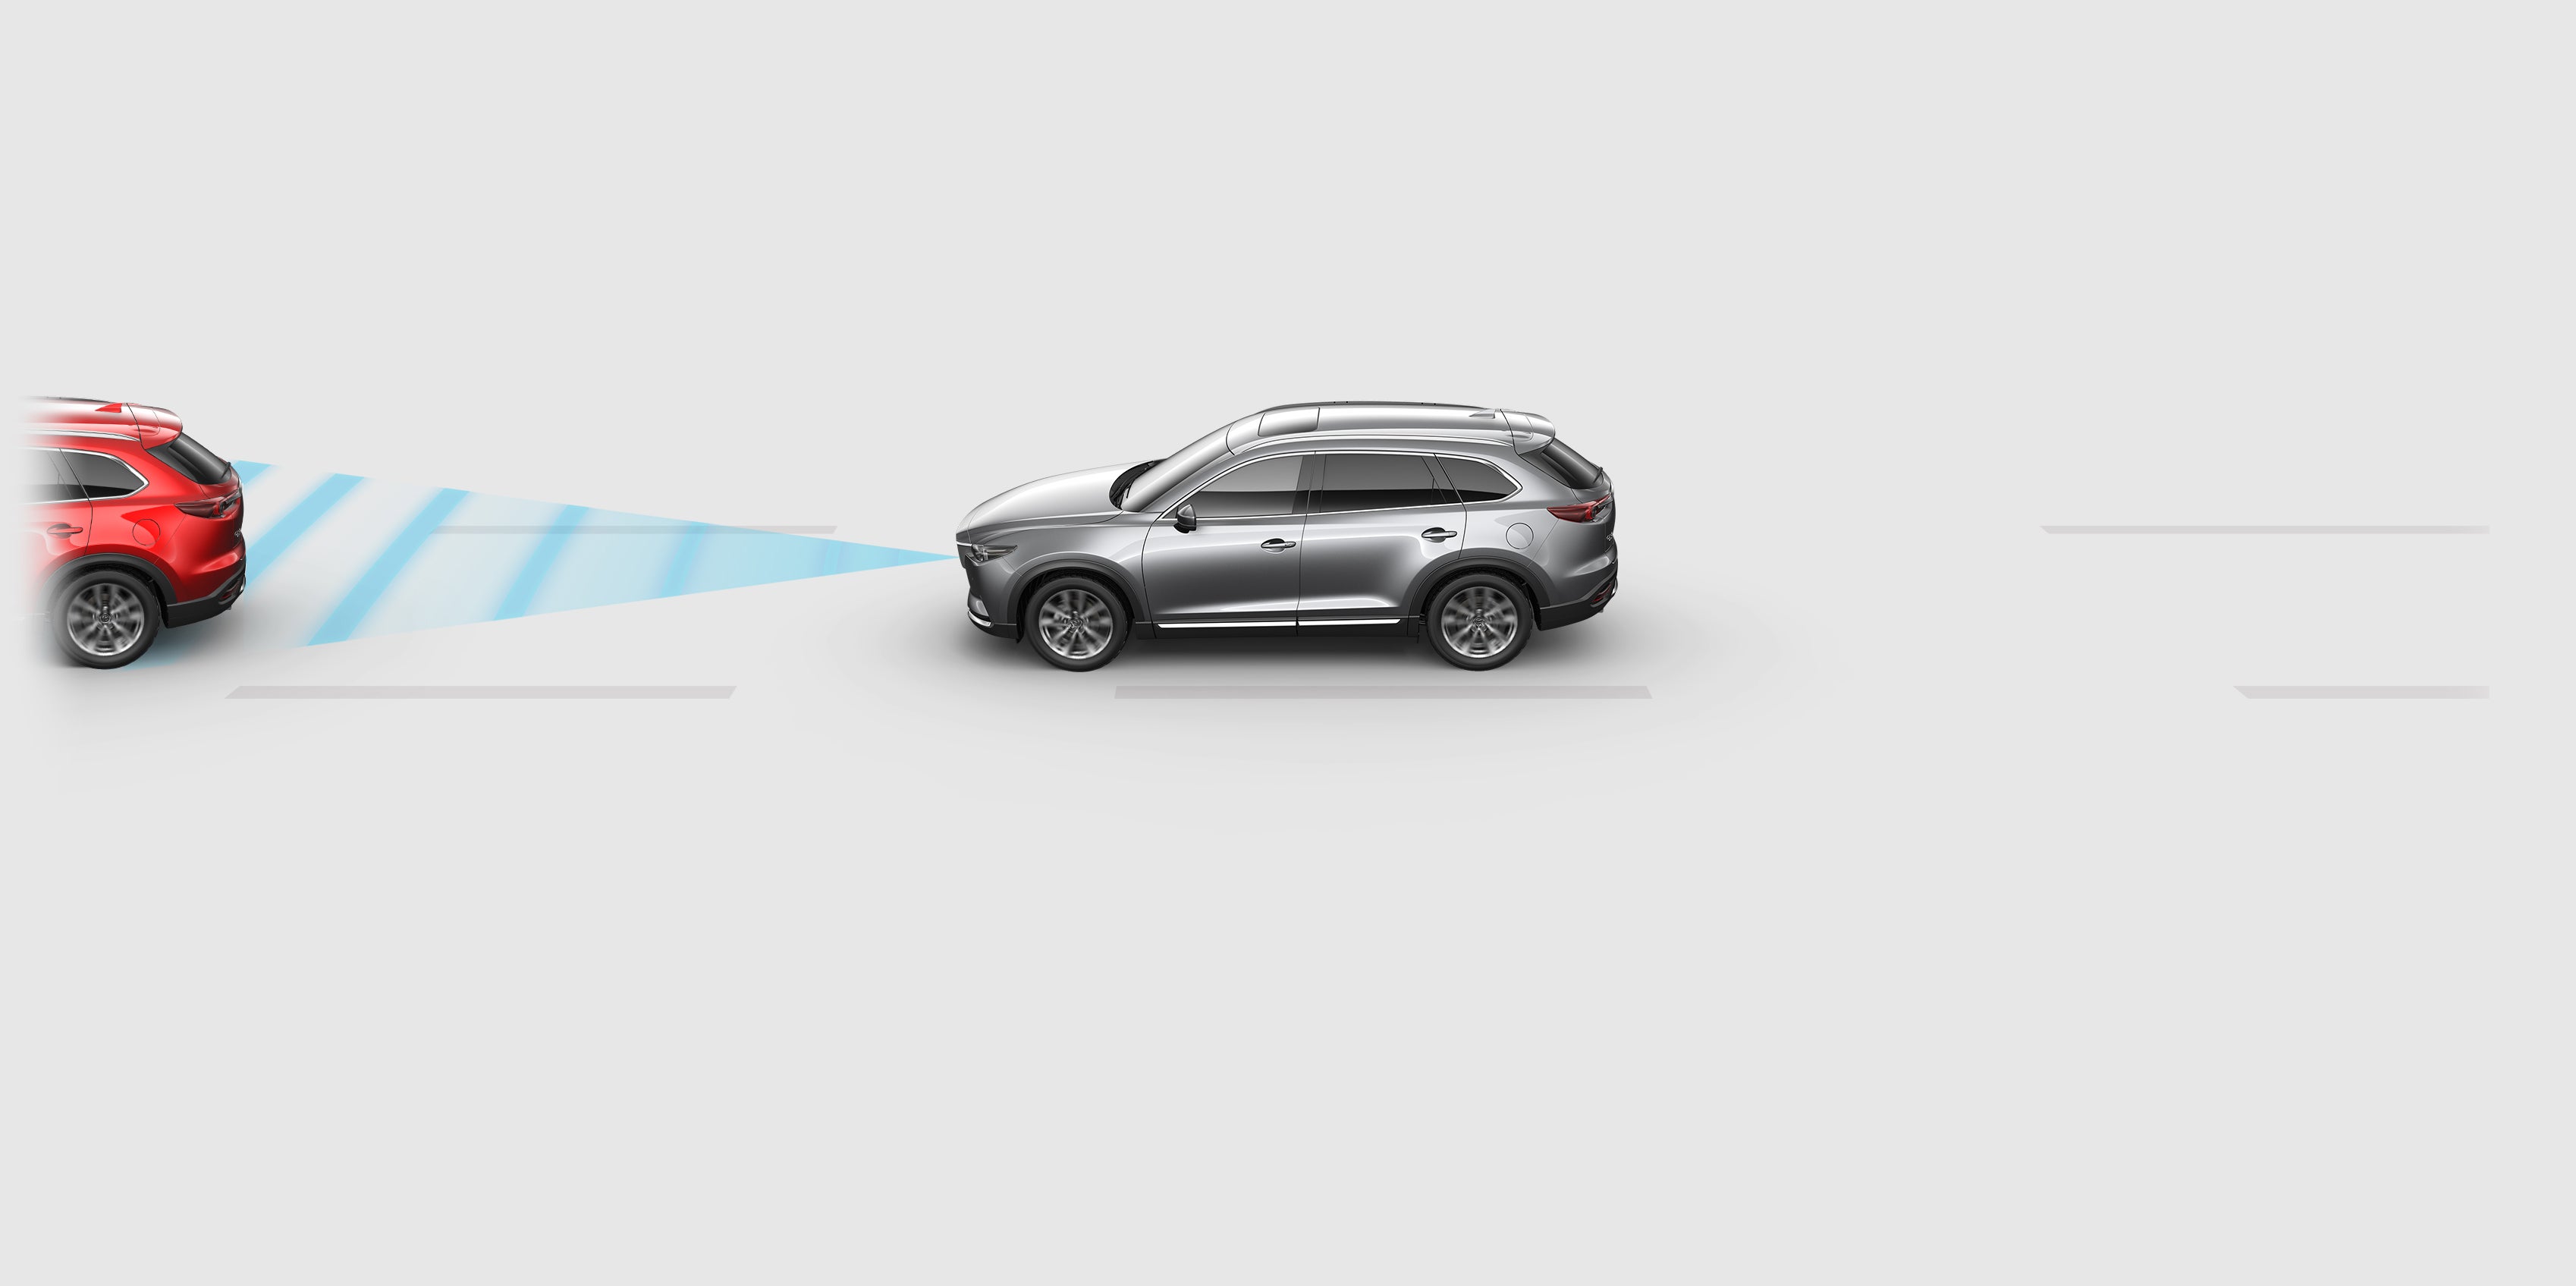 2021 Mazda CX-9 Radar Cruise Control with Stop and Go | Mazda of Milford in Milford CT